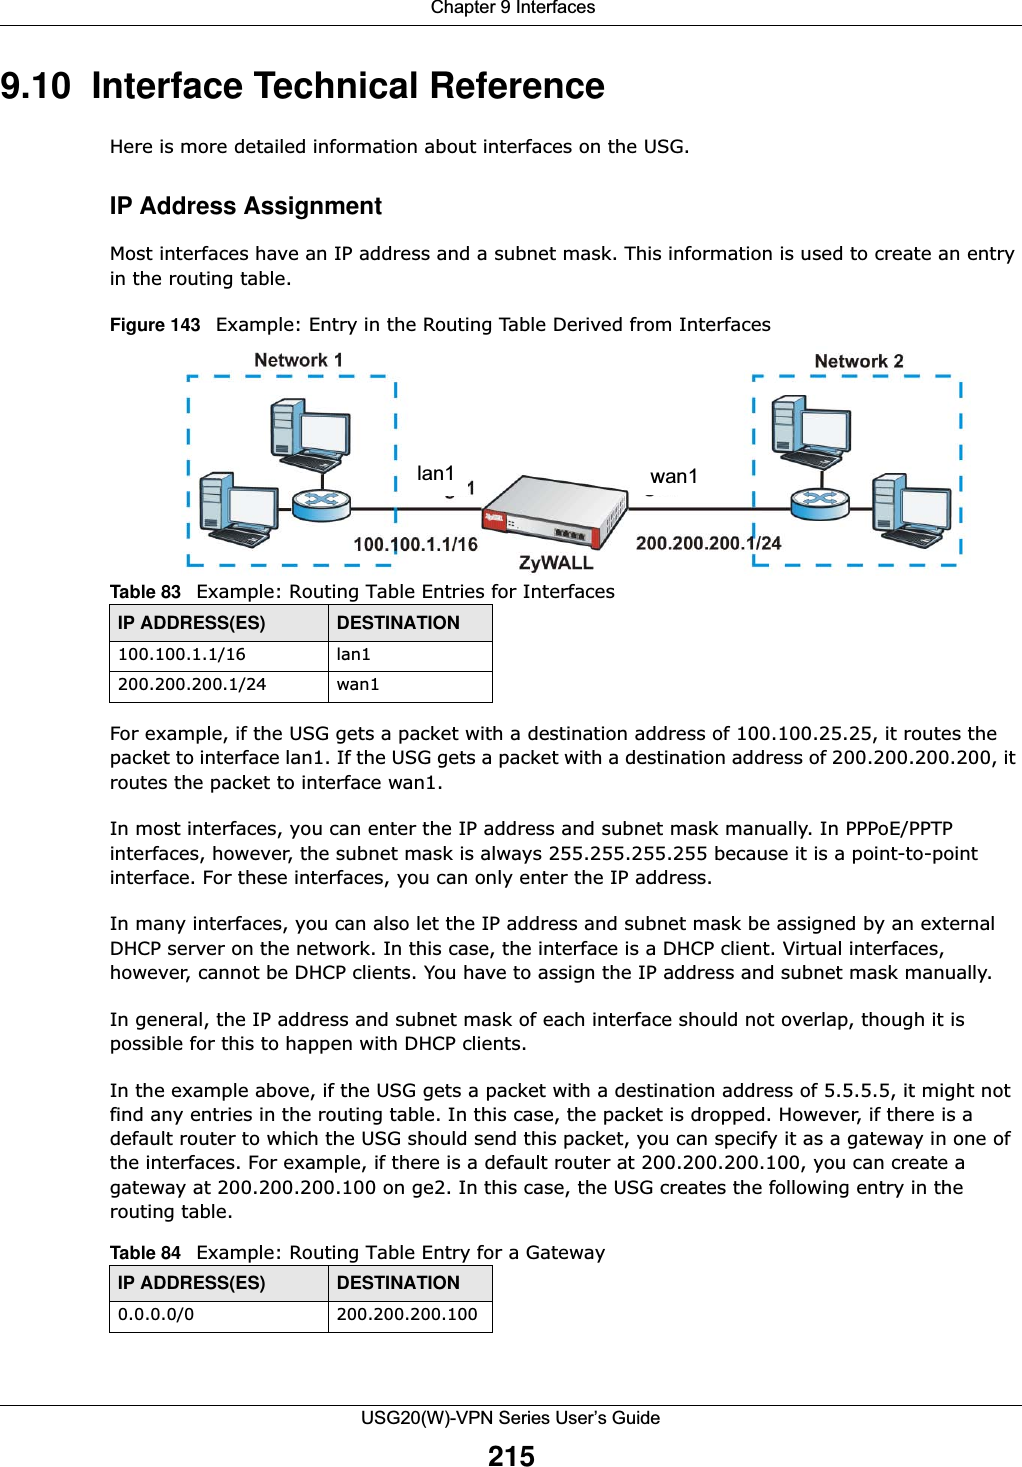  Chapter 9 InterfacesUSG20(W)-VPN Series User’s Guide2159.10  Interface Technical ReferenceHere is more detailed information about interfaces on the USG.IP Address AssignmentMost interfaces have an IP address and a subnet mask. This information is used to create an entry in the routing table.Figure 143   Example: Entry in the Routing Table Derived from InterfacesFor example, if the USG gets a packet with a destination address of 100.100.25.25, it routes the packet to interface lan1. If the USG gets a packet with a destination address of 200.200.200.200, it routes the packet to interface wan1.In most interfaces, you can enter the IP address and subnet mask manually. In PPPoE/PPTP interfaces, however, the subnet mask is always 255.255.255.255 because it is a point-to-point interface. For these interfaces, you can only enter the IP address.In many interfaces, you can also let the IP address and subnet mask be assigned by an external DHCP server on the network. In this case, the interface is a DHCP client. Virtual interfaces, however, cannot be DHCP clients. You have to assign the IP address and subnet mask manually.In general, the IP address and subnet mask of each interface should not overlap, though it is possible for this to happen with DHCP clients.In the example above, if the USG gets a packet with a destination address of 5.5.5.5, it might not find any entries in the routing table. In this case, the packet is dropped. However, if there is a default router to which the USG should send this packet, you can specify it as a gateway in one of the interfaces. For example, if there is a default router at 200.200.200.100, you can create a gateway at 200.200.200.100 on ge2. In this case, the USG creates the following entry in the routing table.Table 83   Example: Routing Table Entries for InterfacesIP ADDRESS(ES) DESTINATION100.100.1.1/16 lan1200.200.200.1/24 wan1Table 84   Example: Routing Table Entry for a GatewayIP ADDRESS(ES) DESTINATION0.0.0.0/0 200.200.200.100lan1 wan1